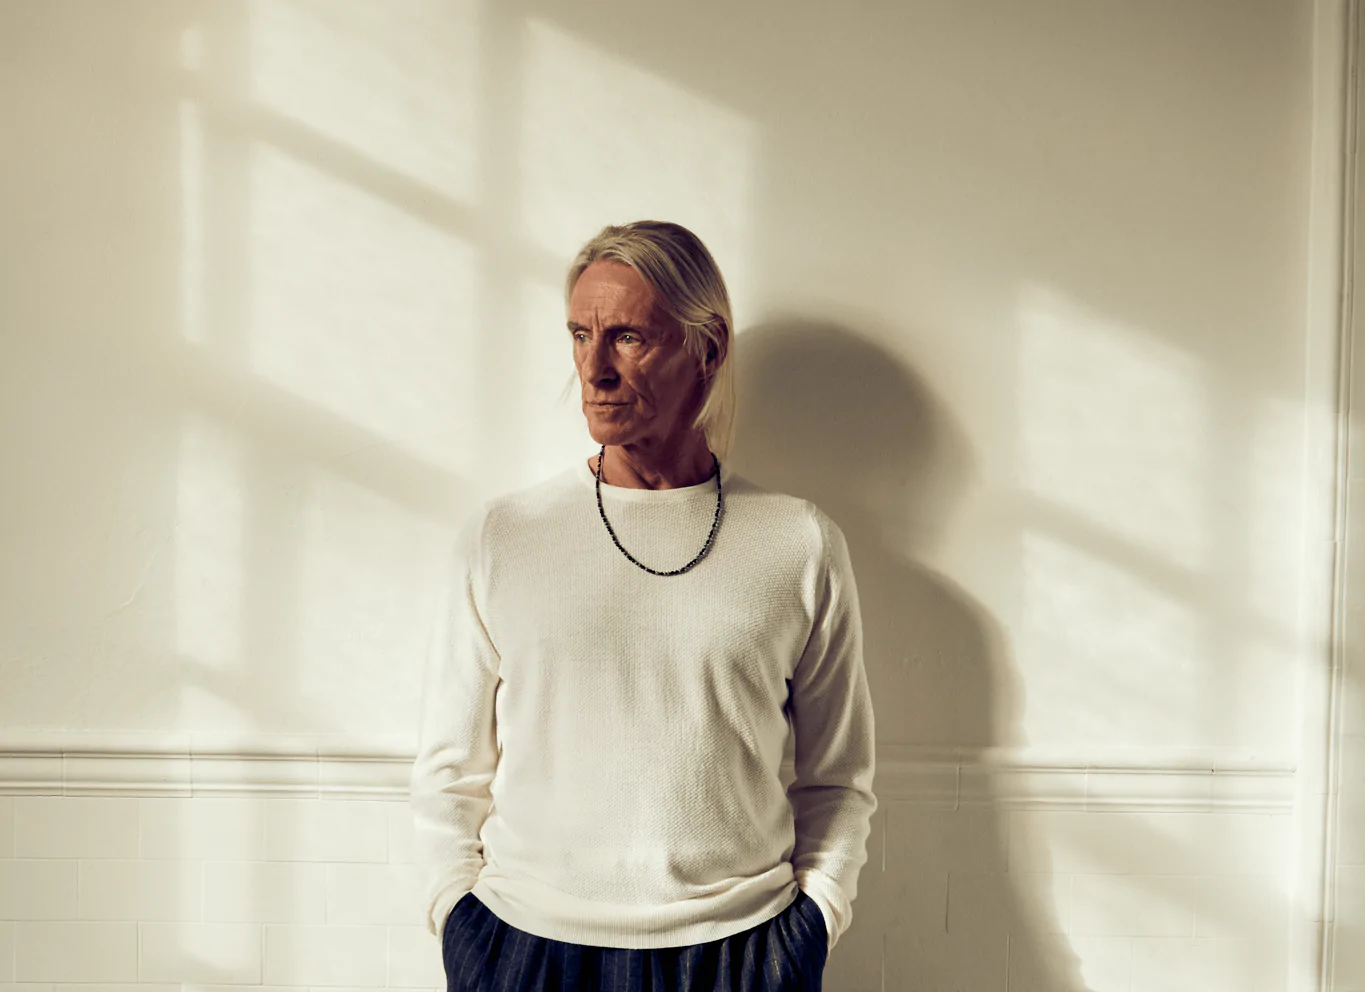 INTERVIEW: Paul Weller – “I’m enjoying songwriting more than ever”